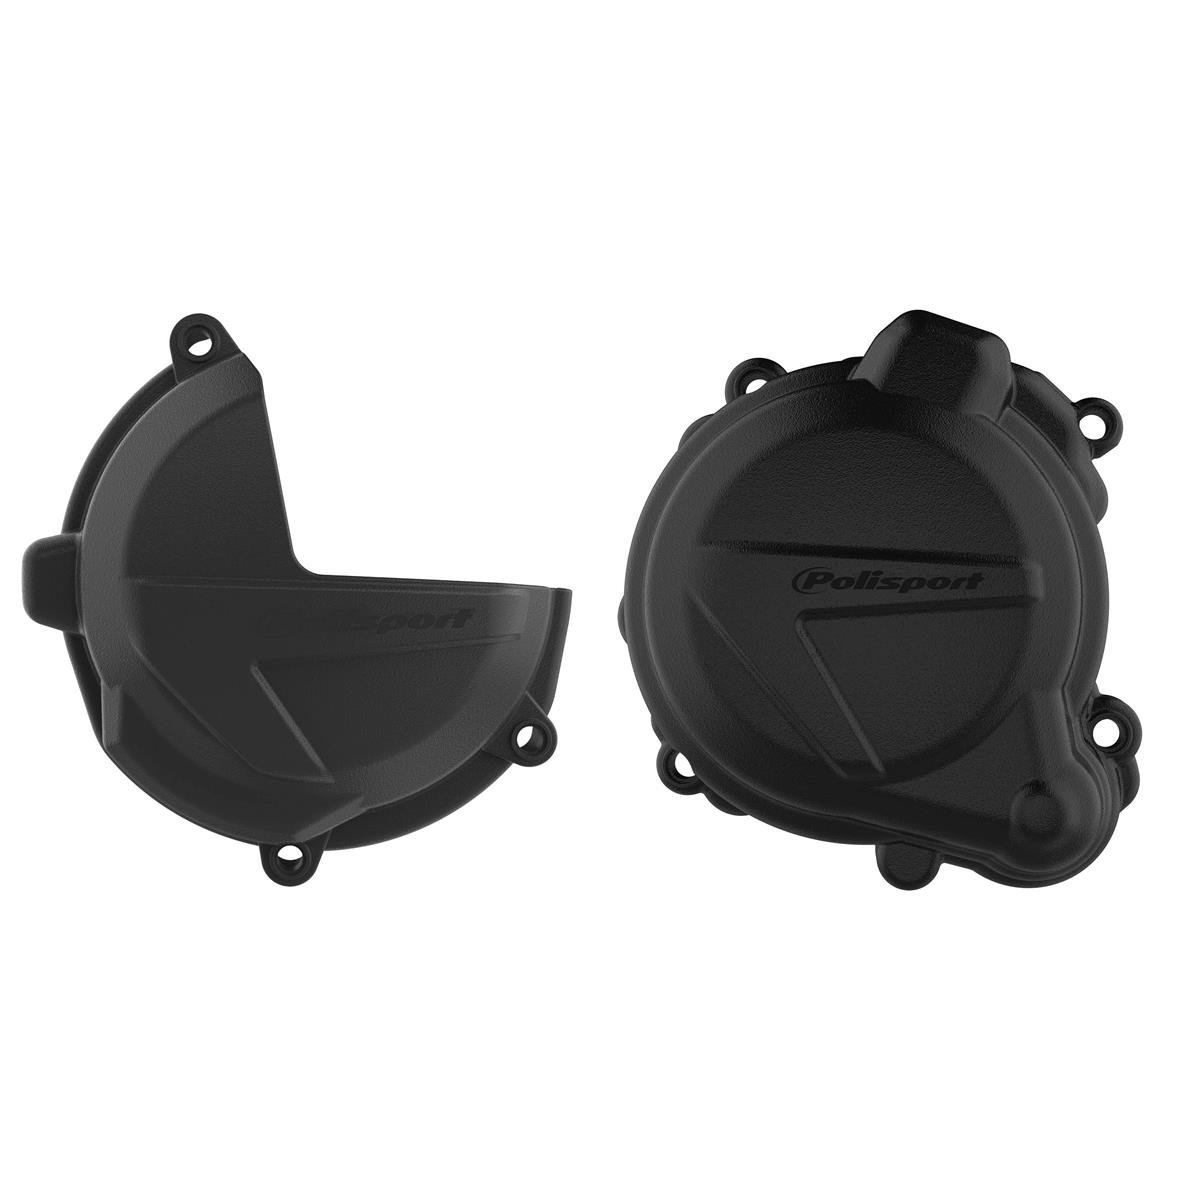 Polisport Clutch/Ignition Cover Protection  Beta RR 250/300 2T 18-19, Xtrainer 18-19, Black